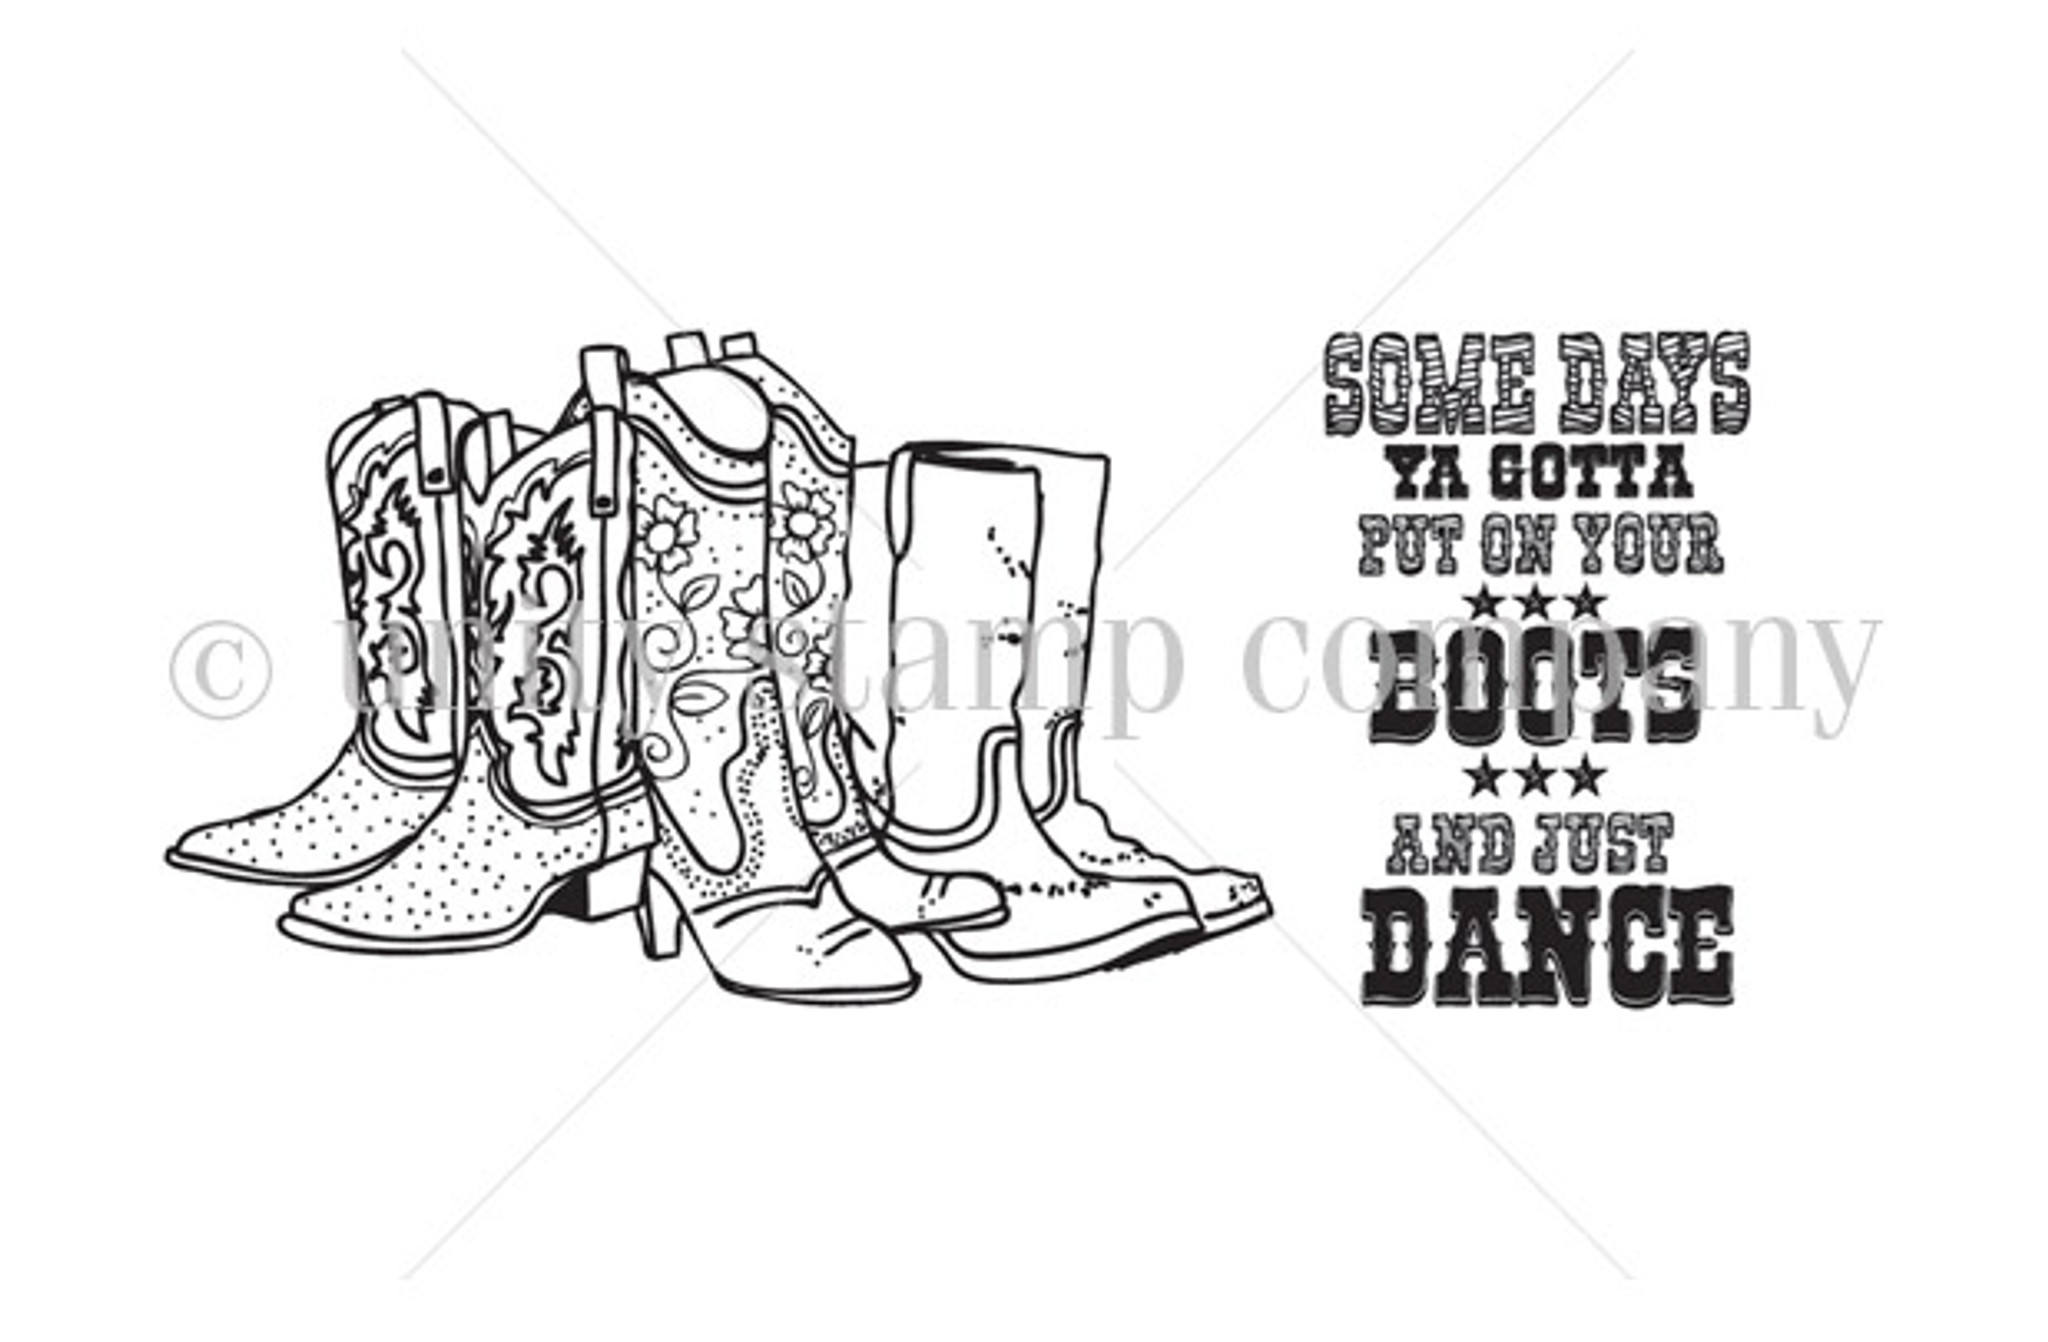 put on shoes clipart black and white